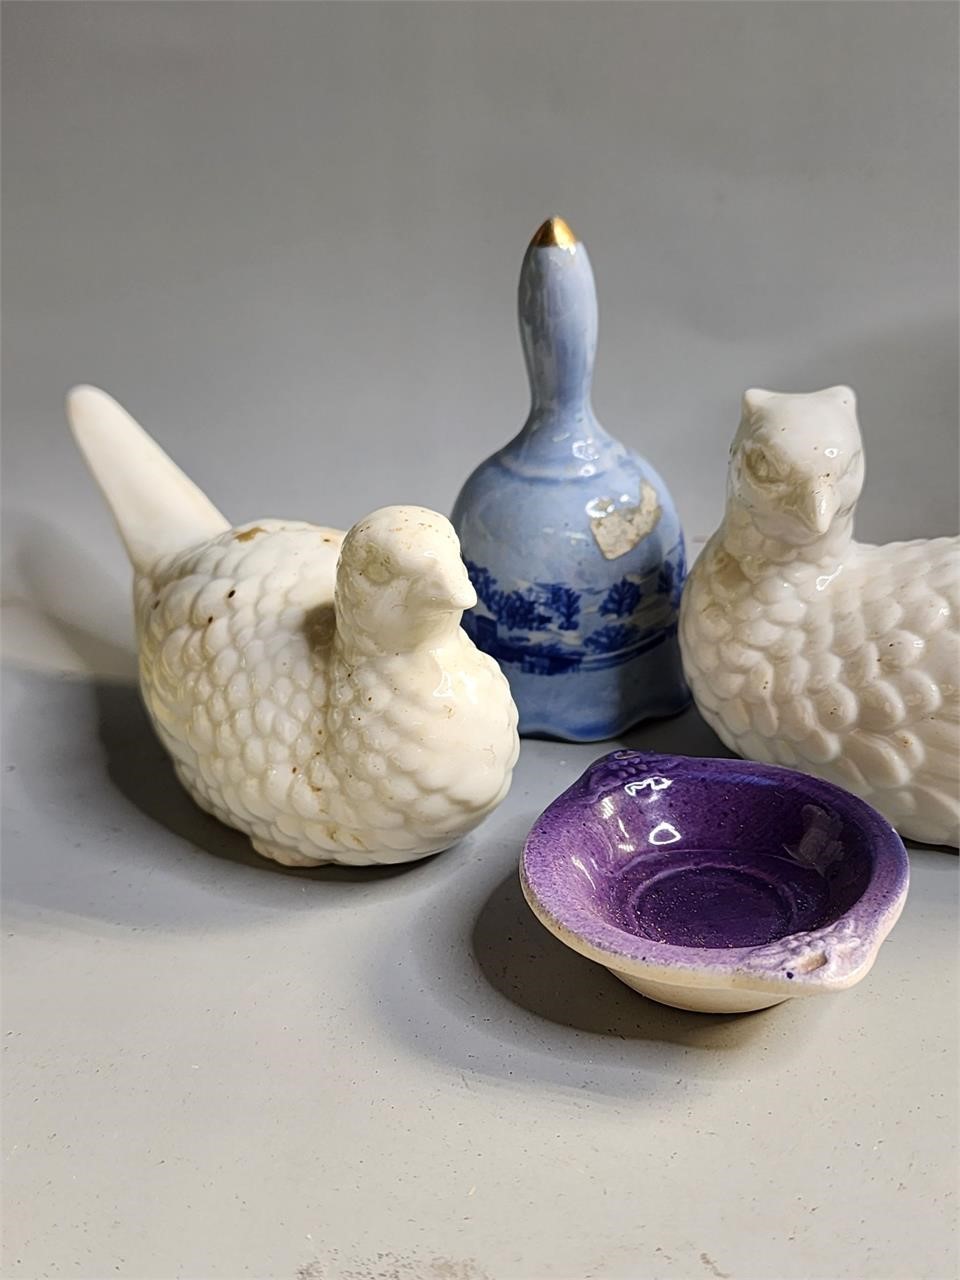 Ceramic pheasants and othe misc...